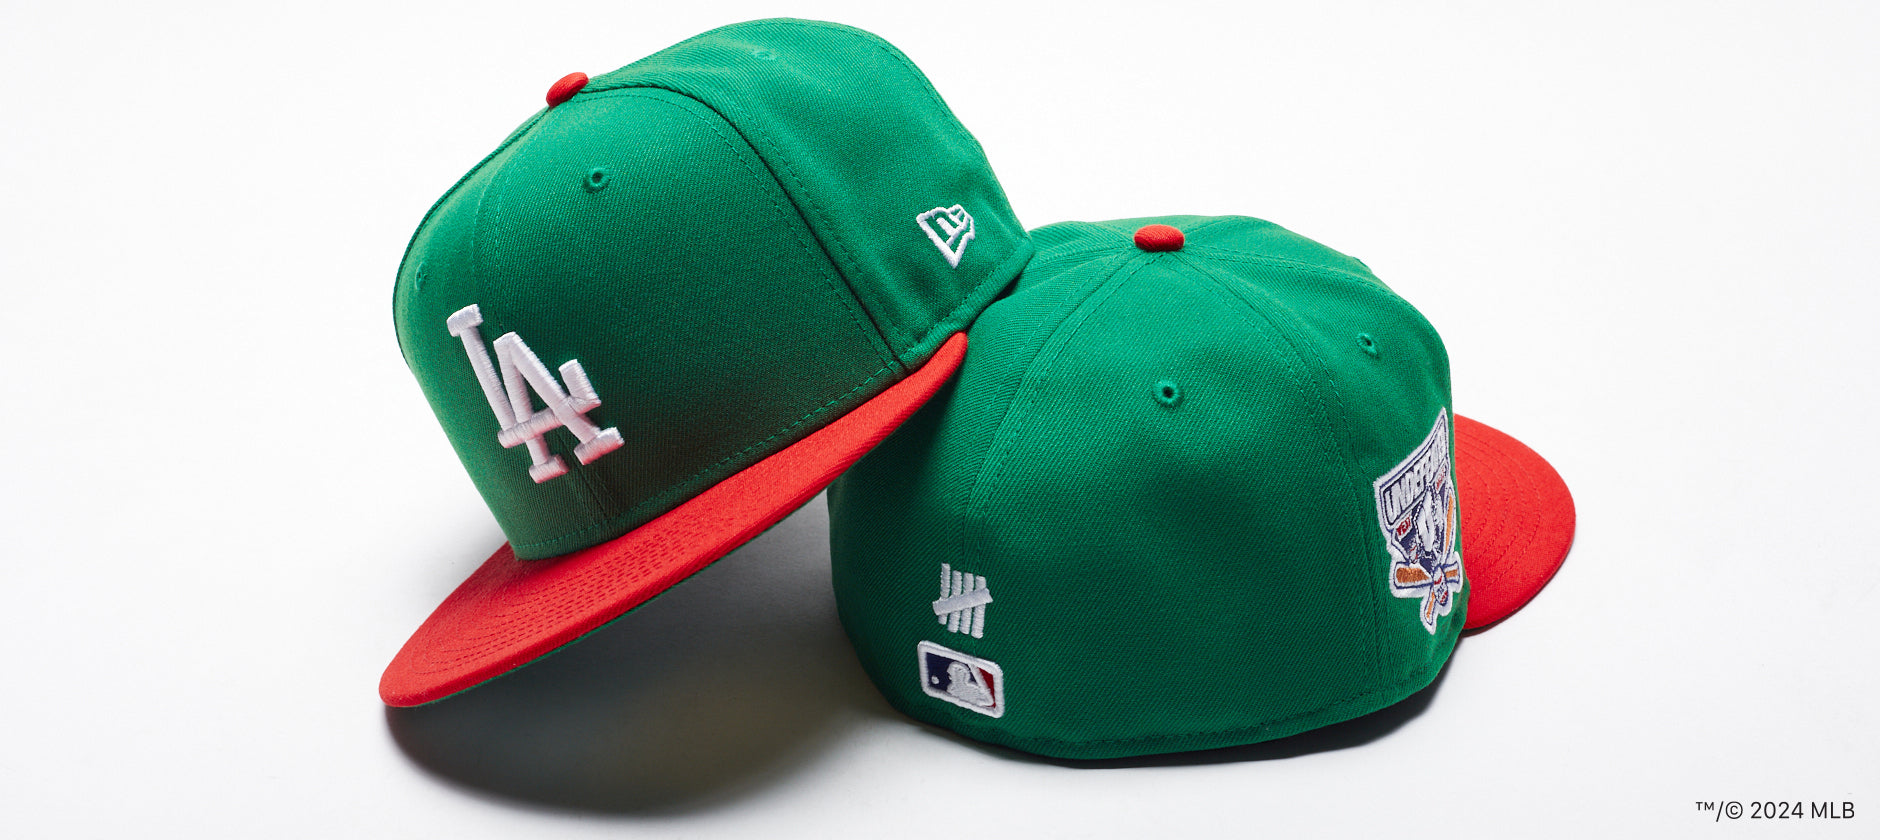 undefeated x los angeles dodgers x new era shop now